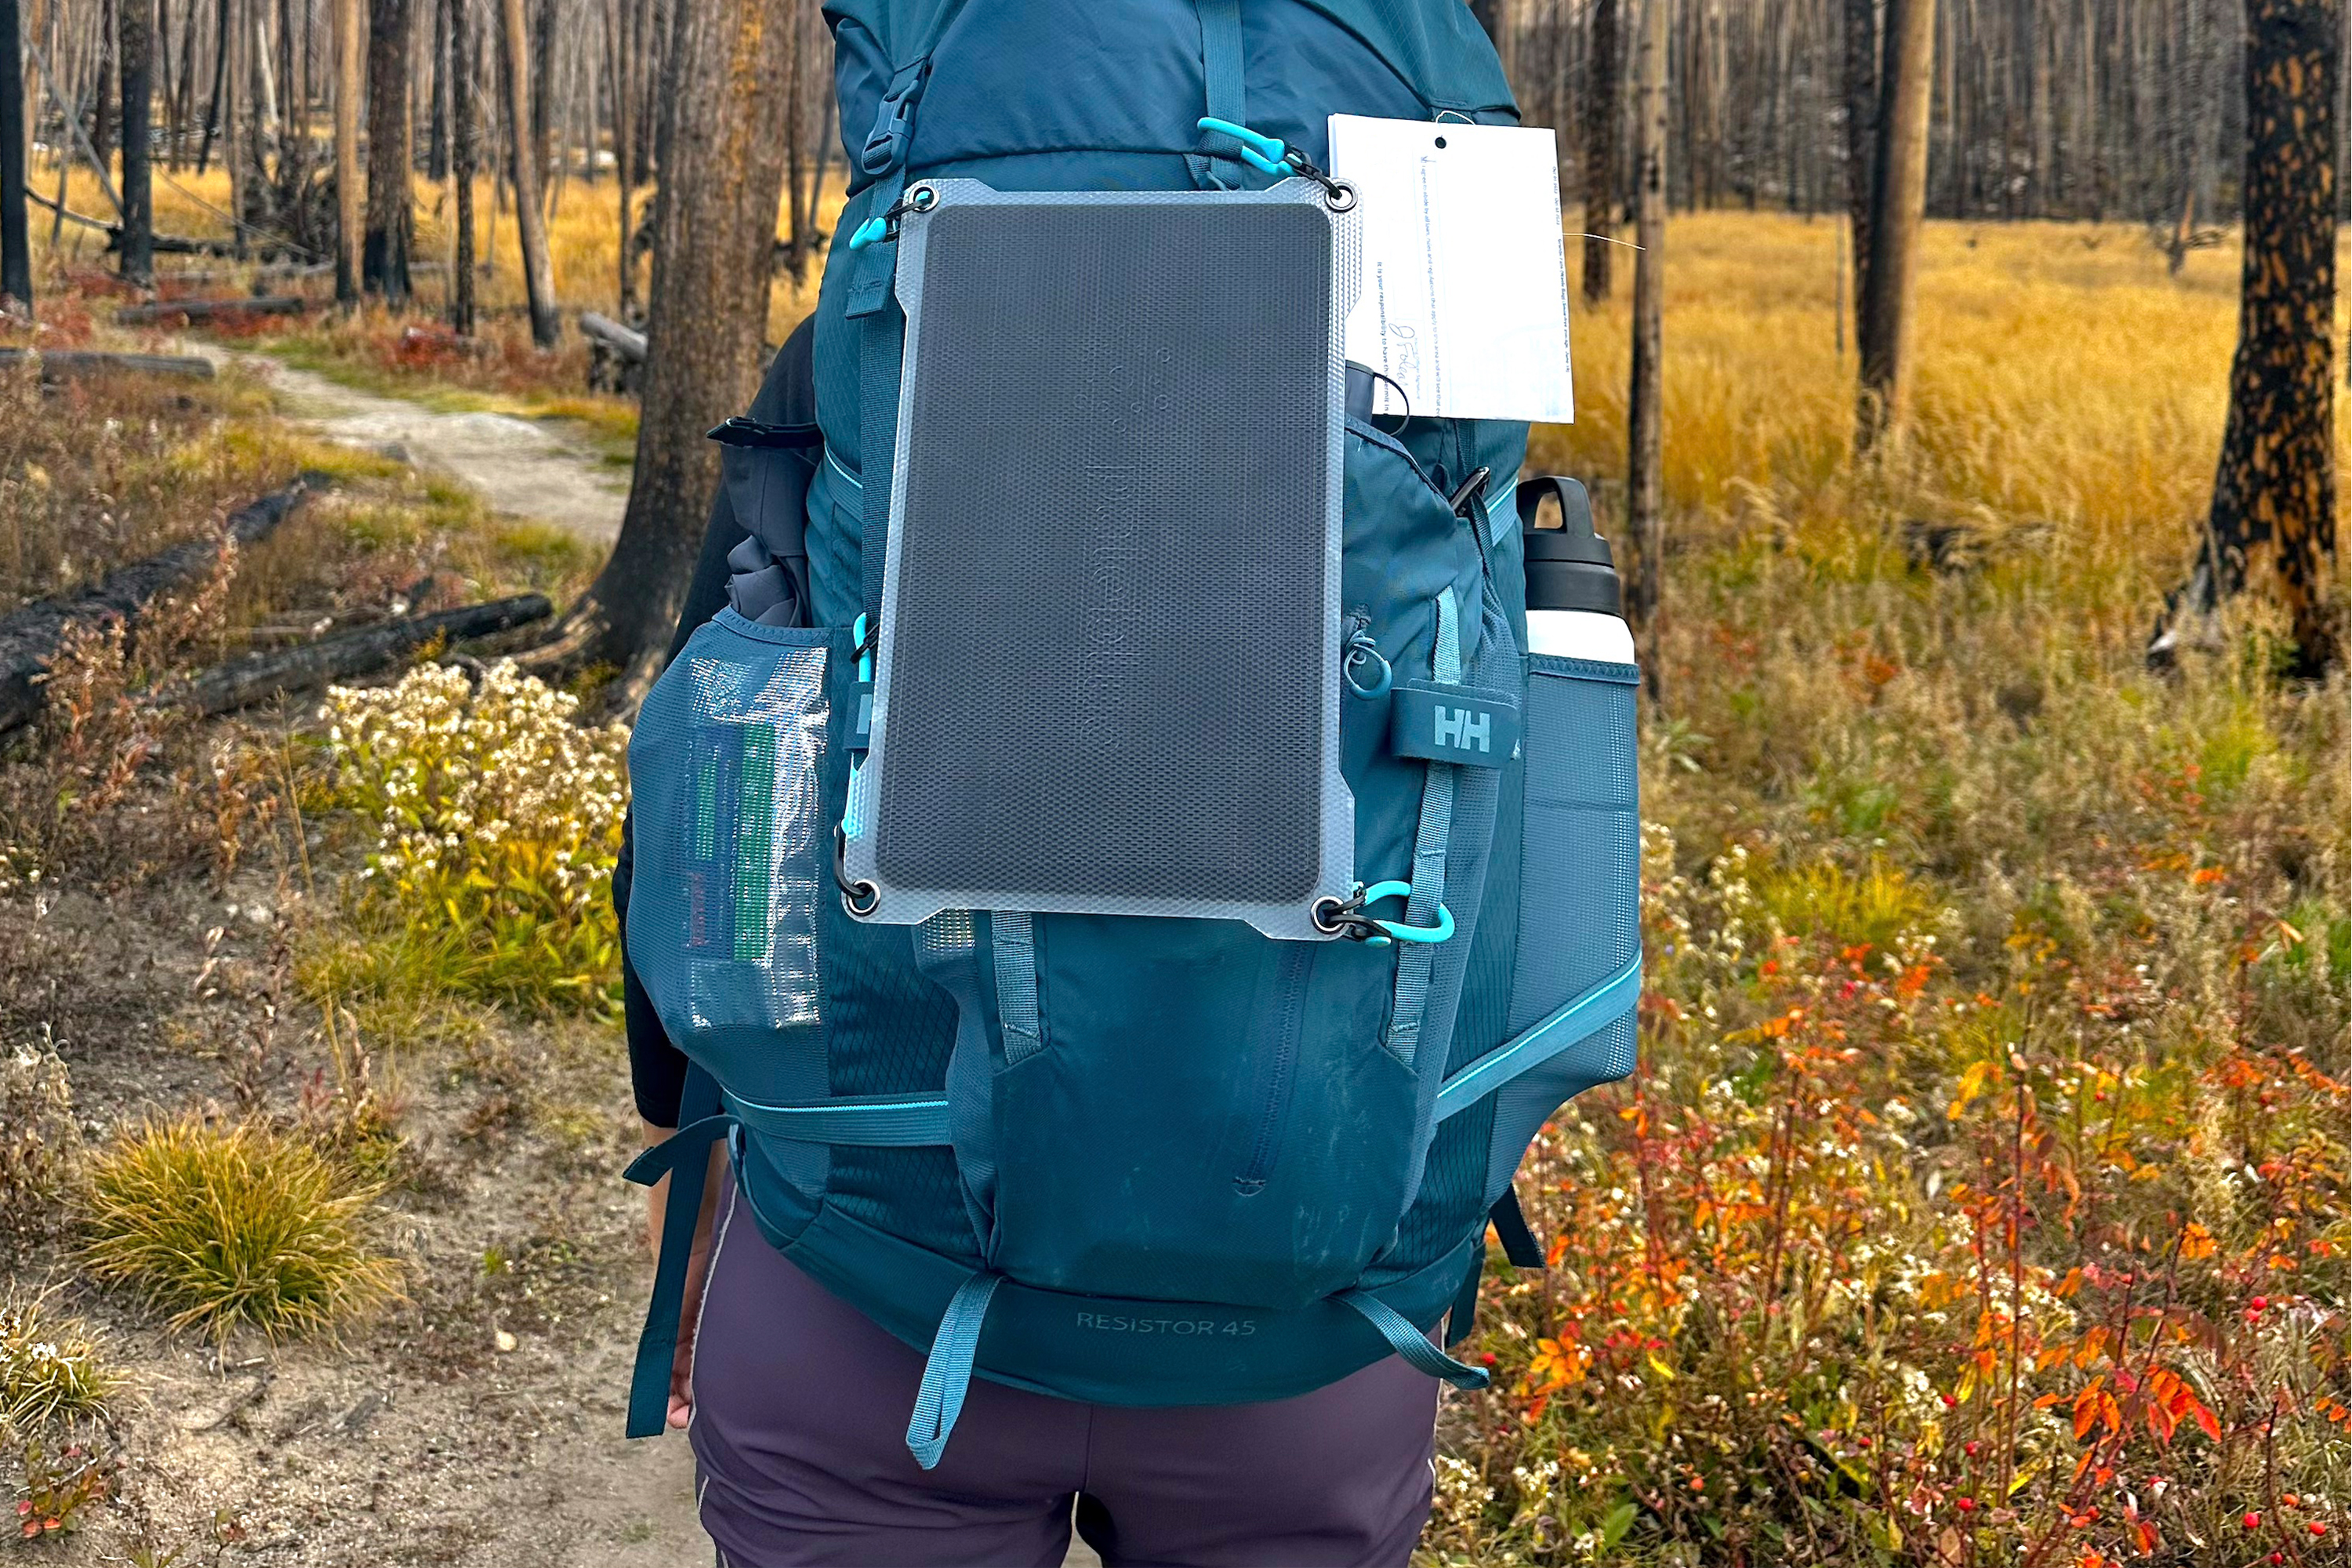 a pale blue earth brand single solar panel attached to a blue hiking backpack